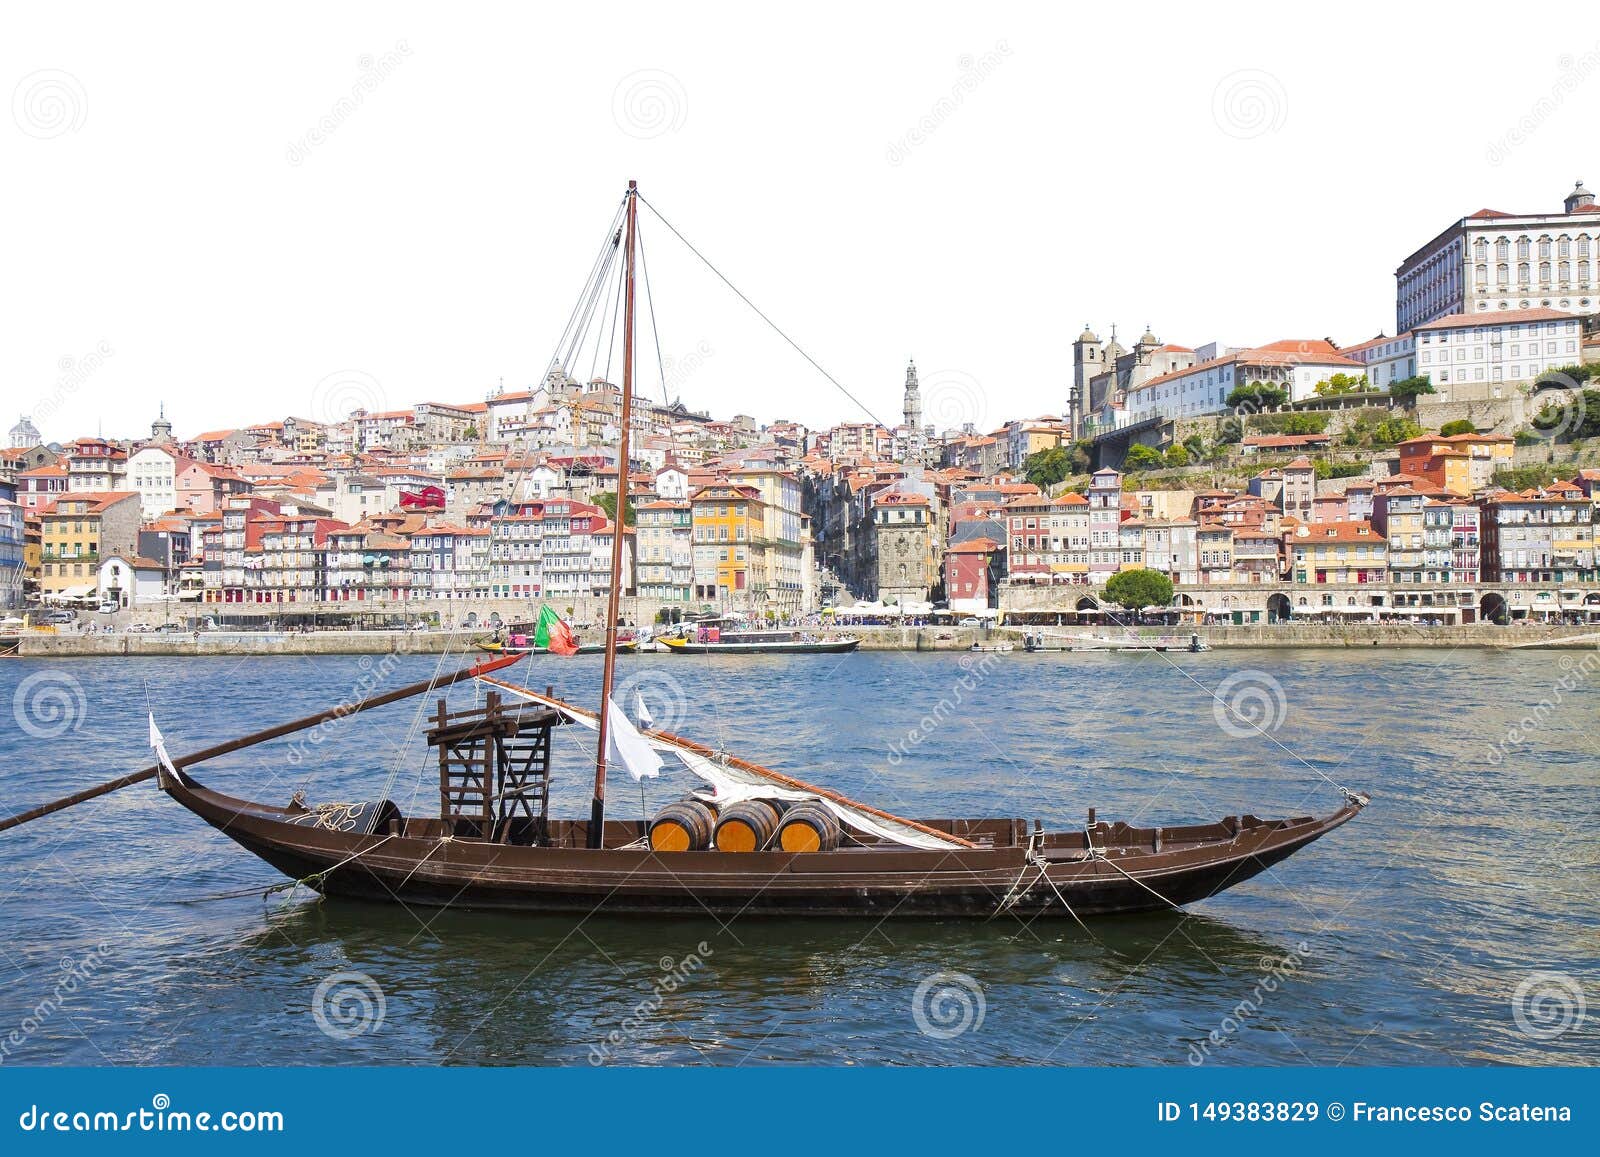 typical portuguese wooden boats, in portuguese called barcos rabelos, used in the past to transport the famous port wine portugal